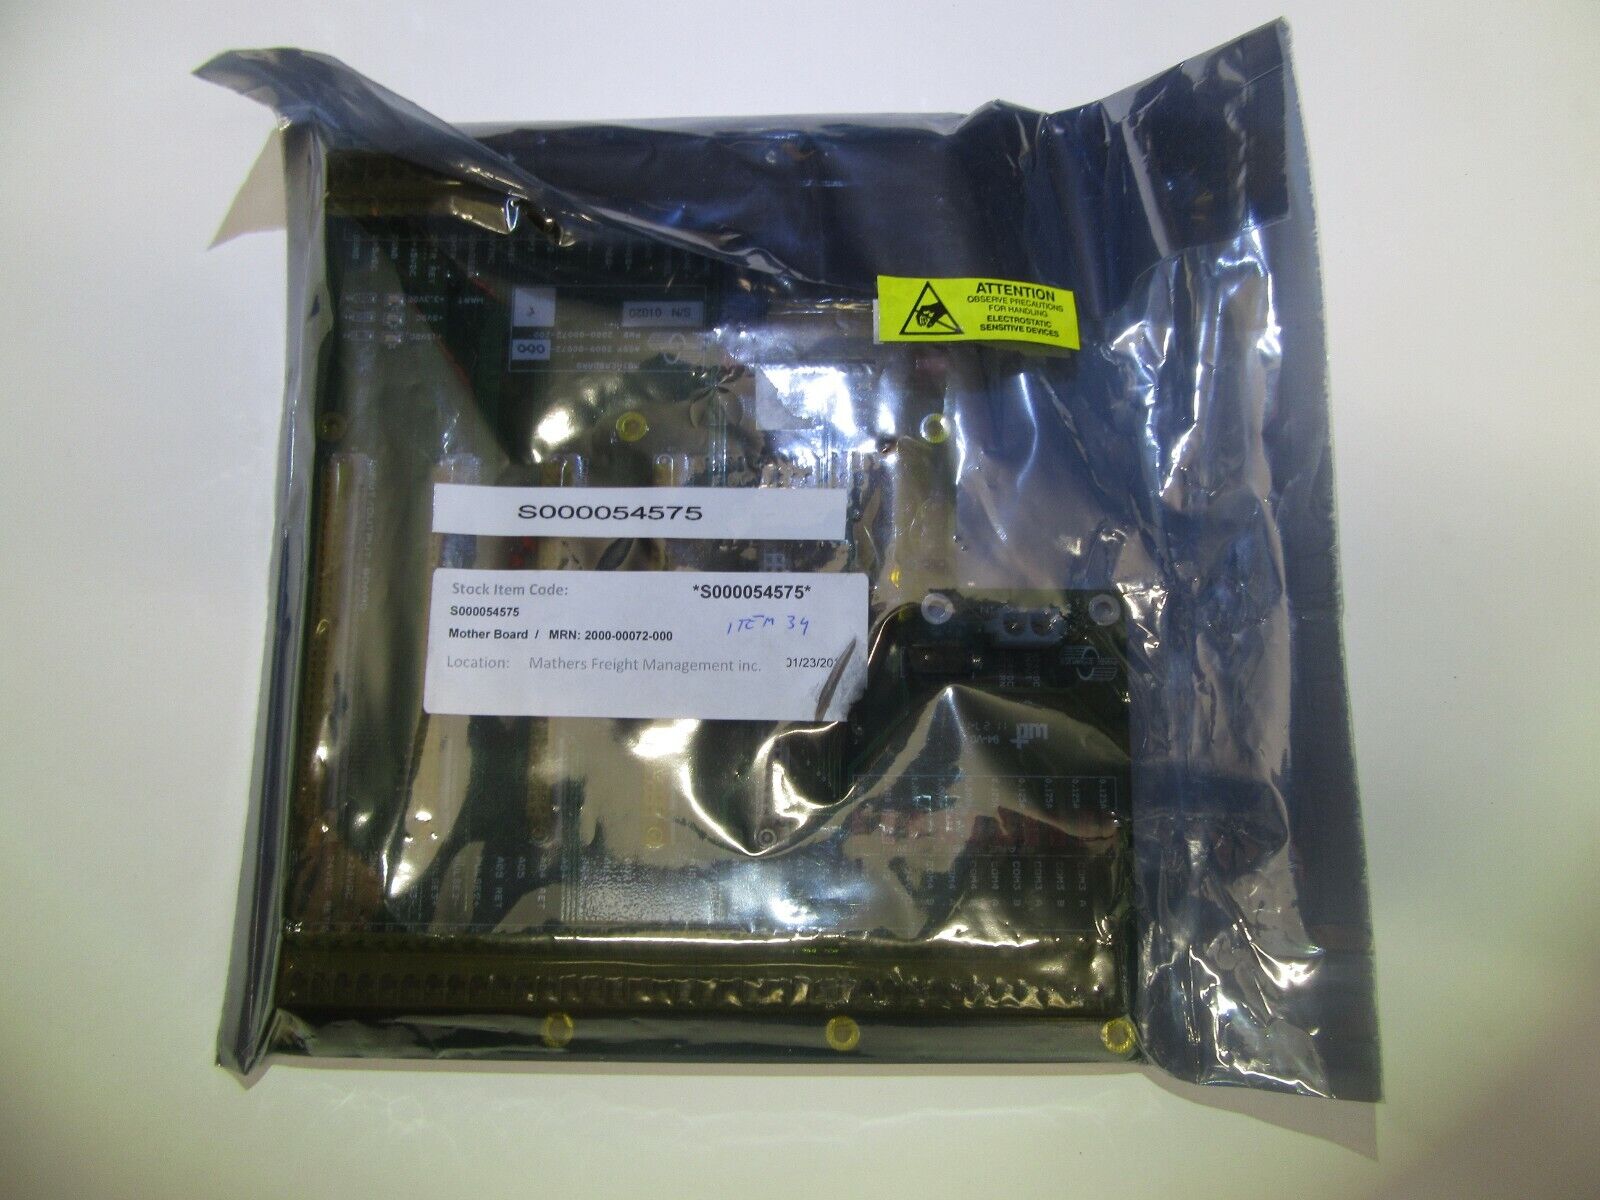  Phase Dynamics MotherBoard ASSY; 2000-00072-000, PWB 2000-00072-200